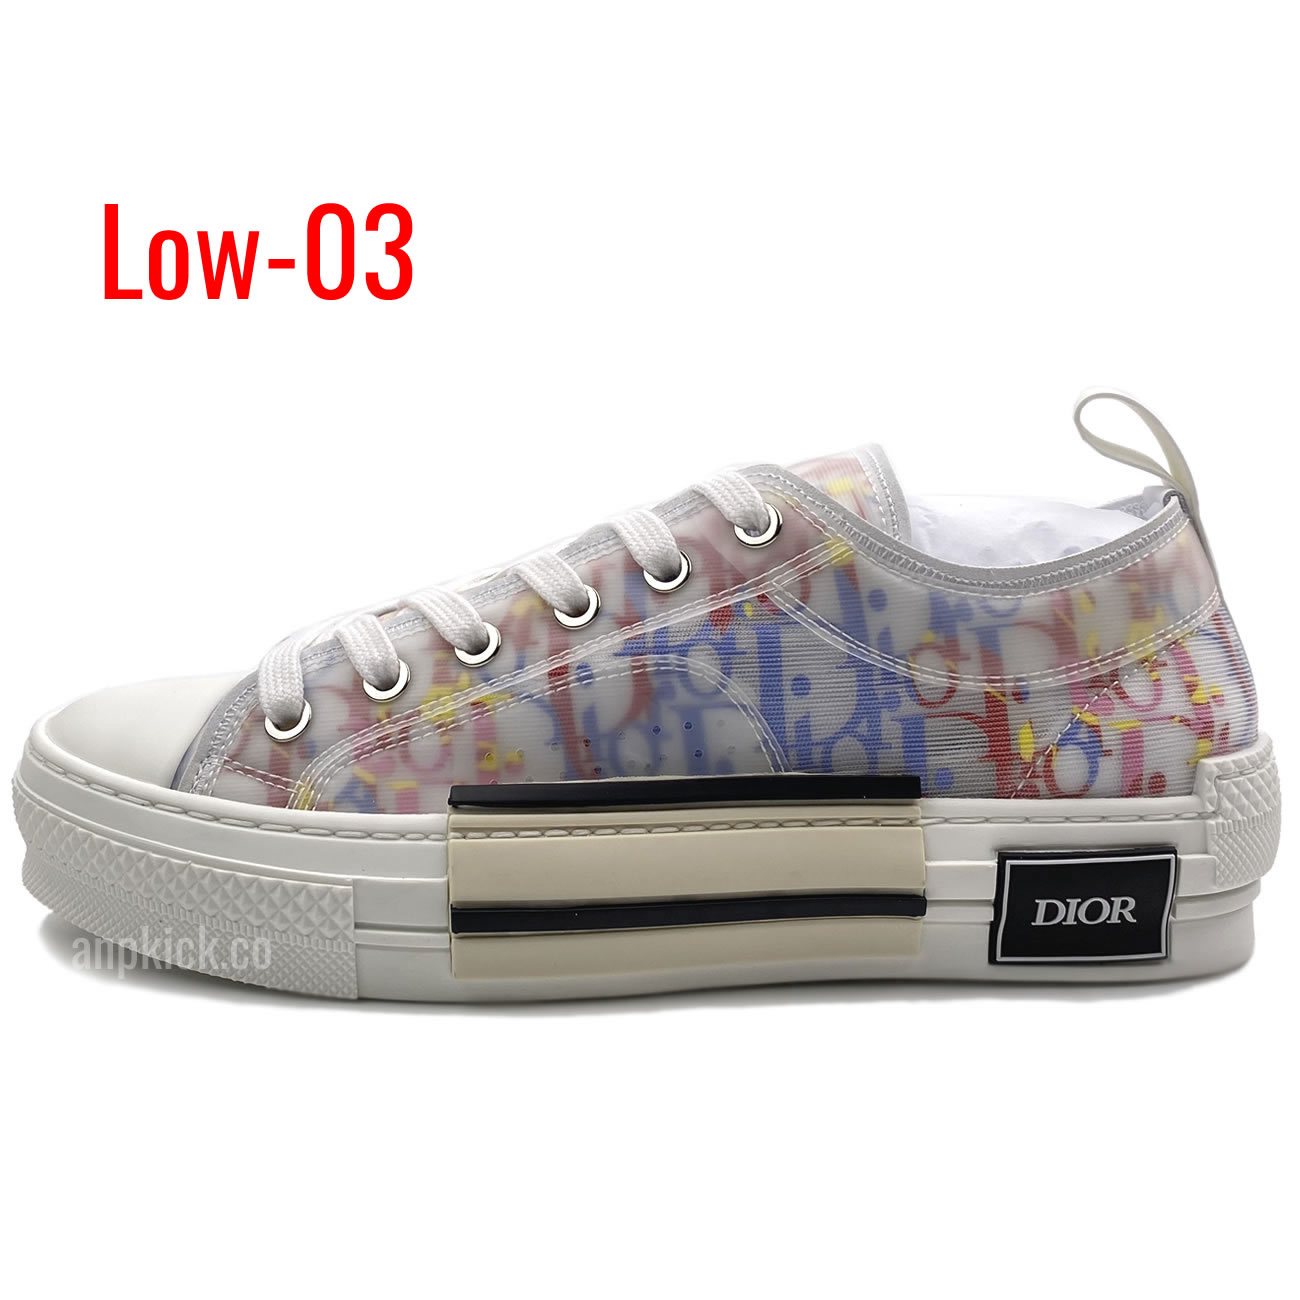 Dior B23 Low Shoes (3) - newkick.org